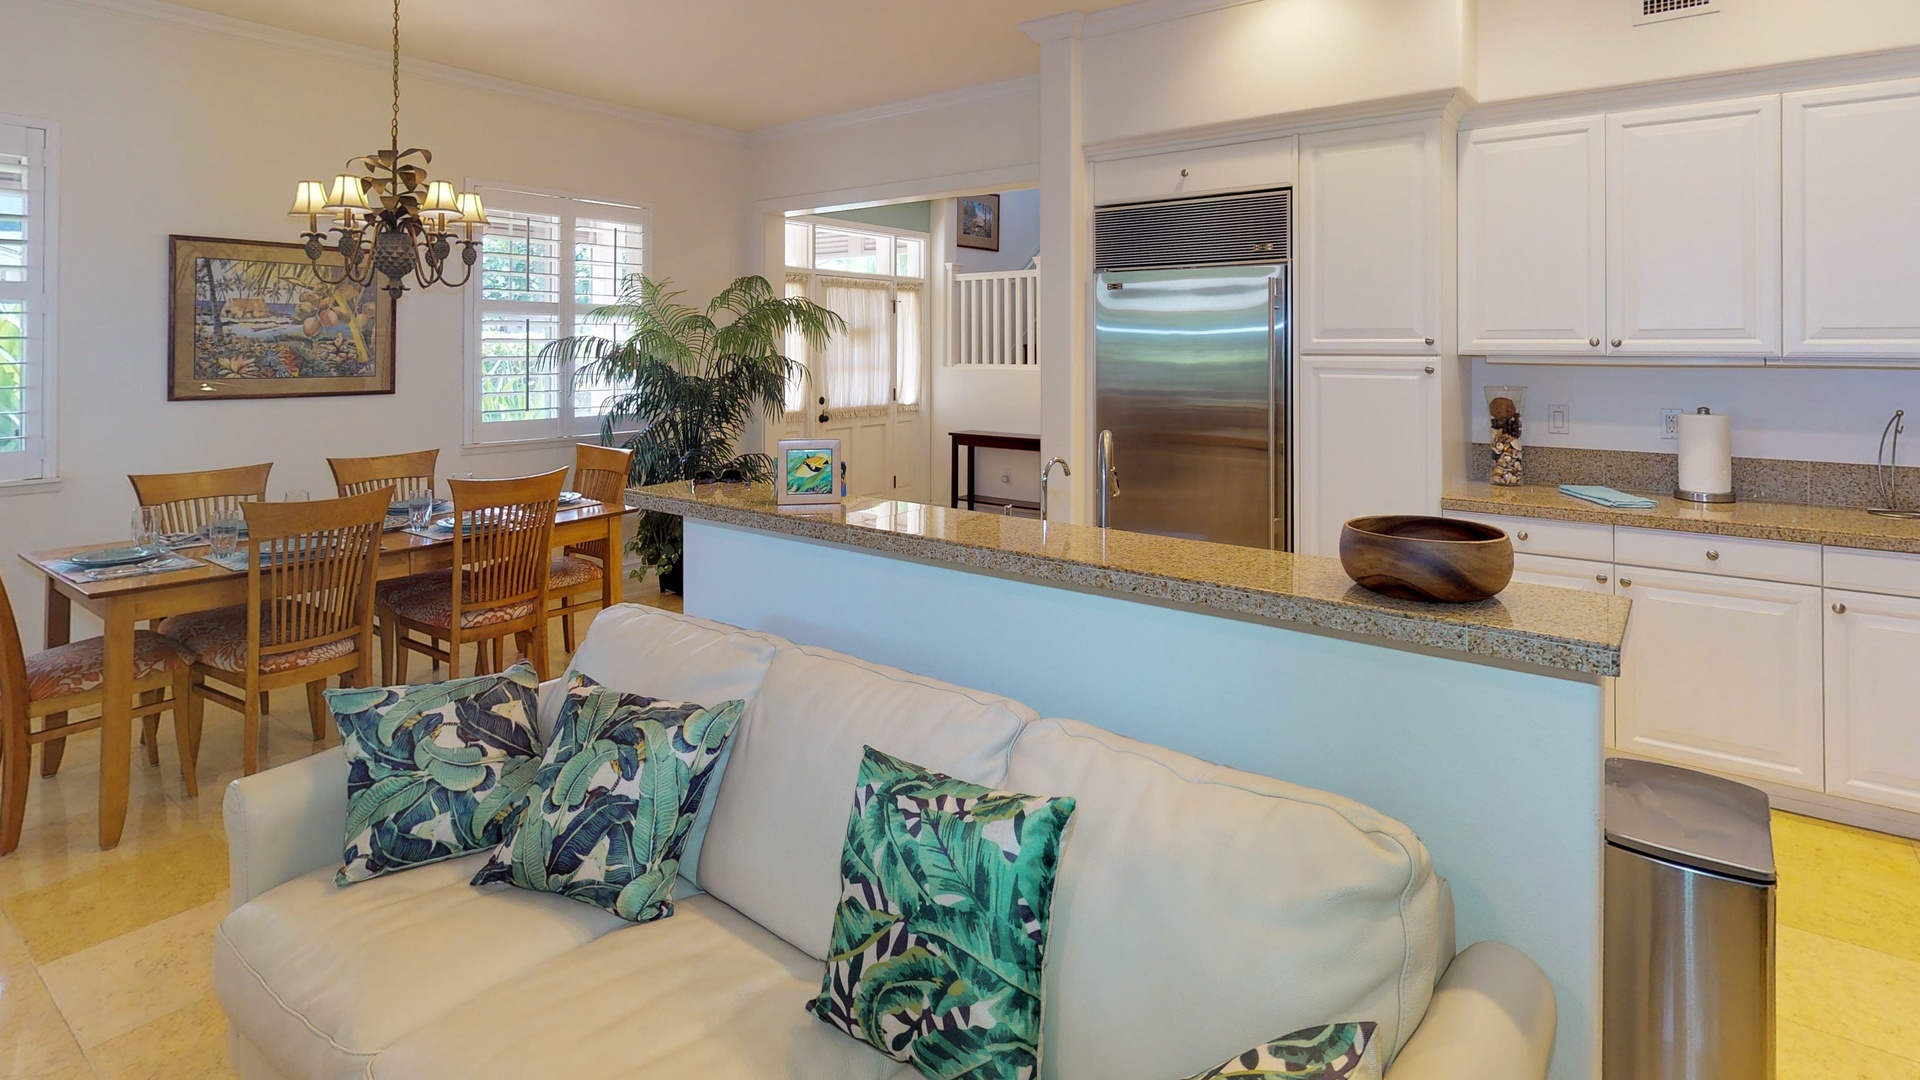 Kapolei Vacation Rentals, Coconut Plantation 1200-4 - The open floor plan connects living, dining and kitchen areas.